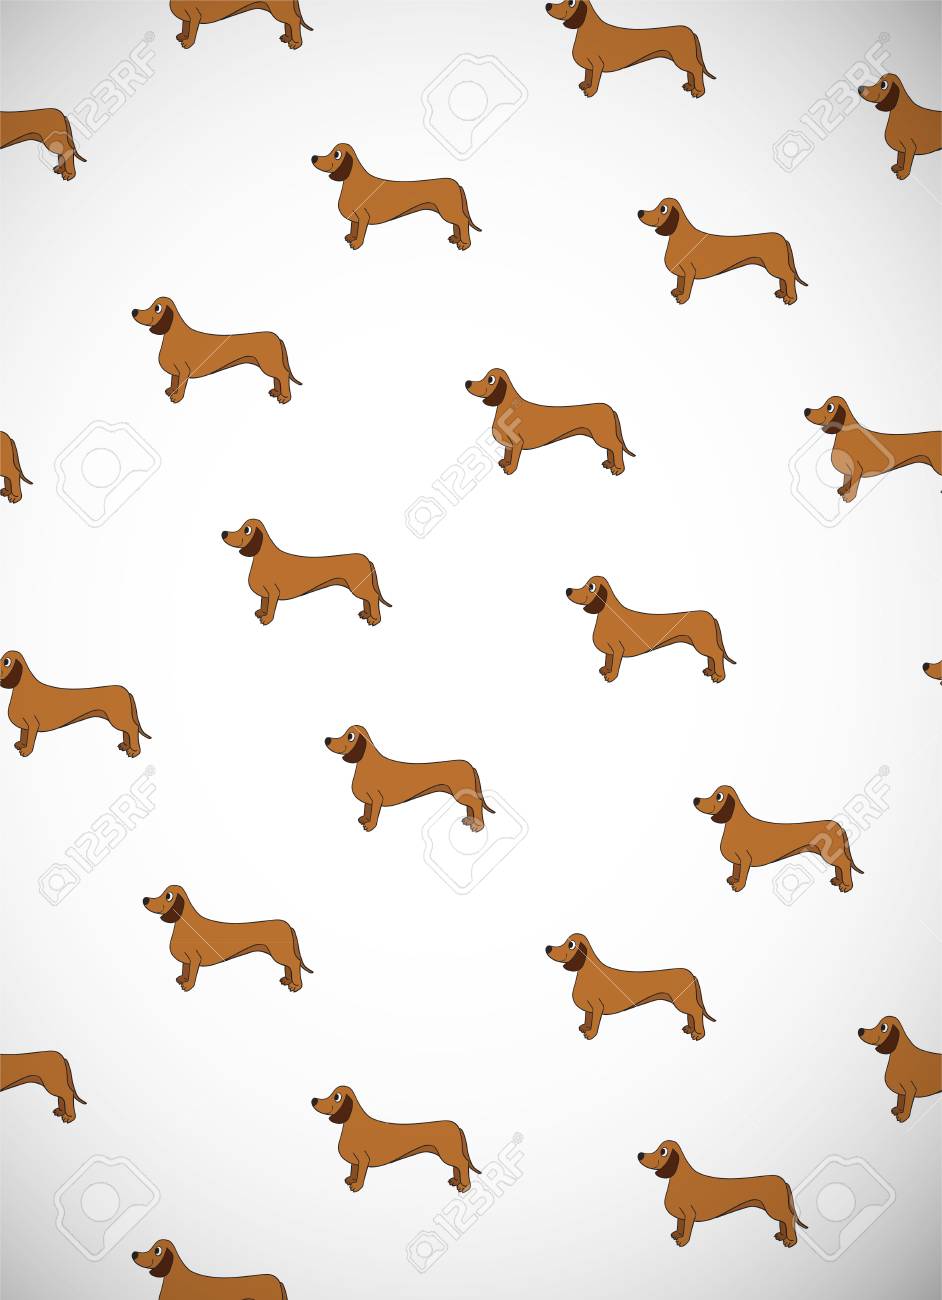 Greeting Card With Cute Cartoon Dogs Breed Dachshund Good For